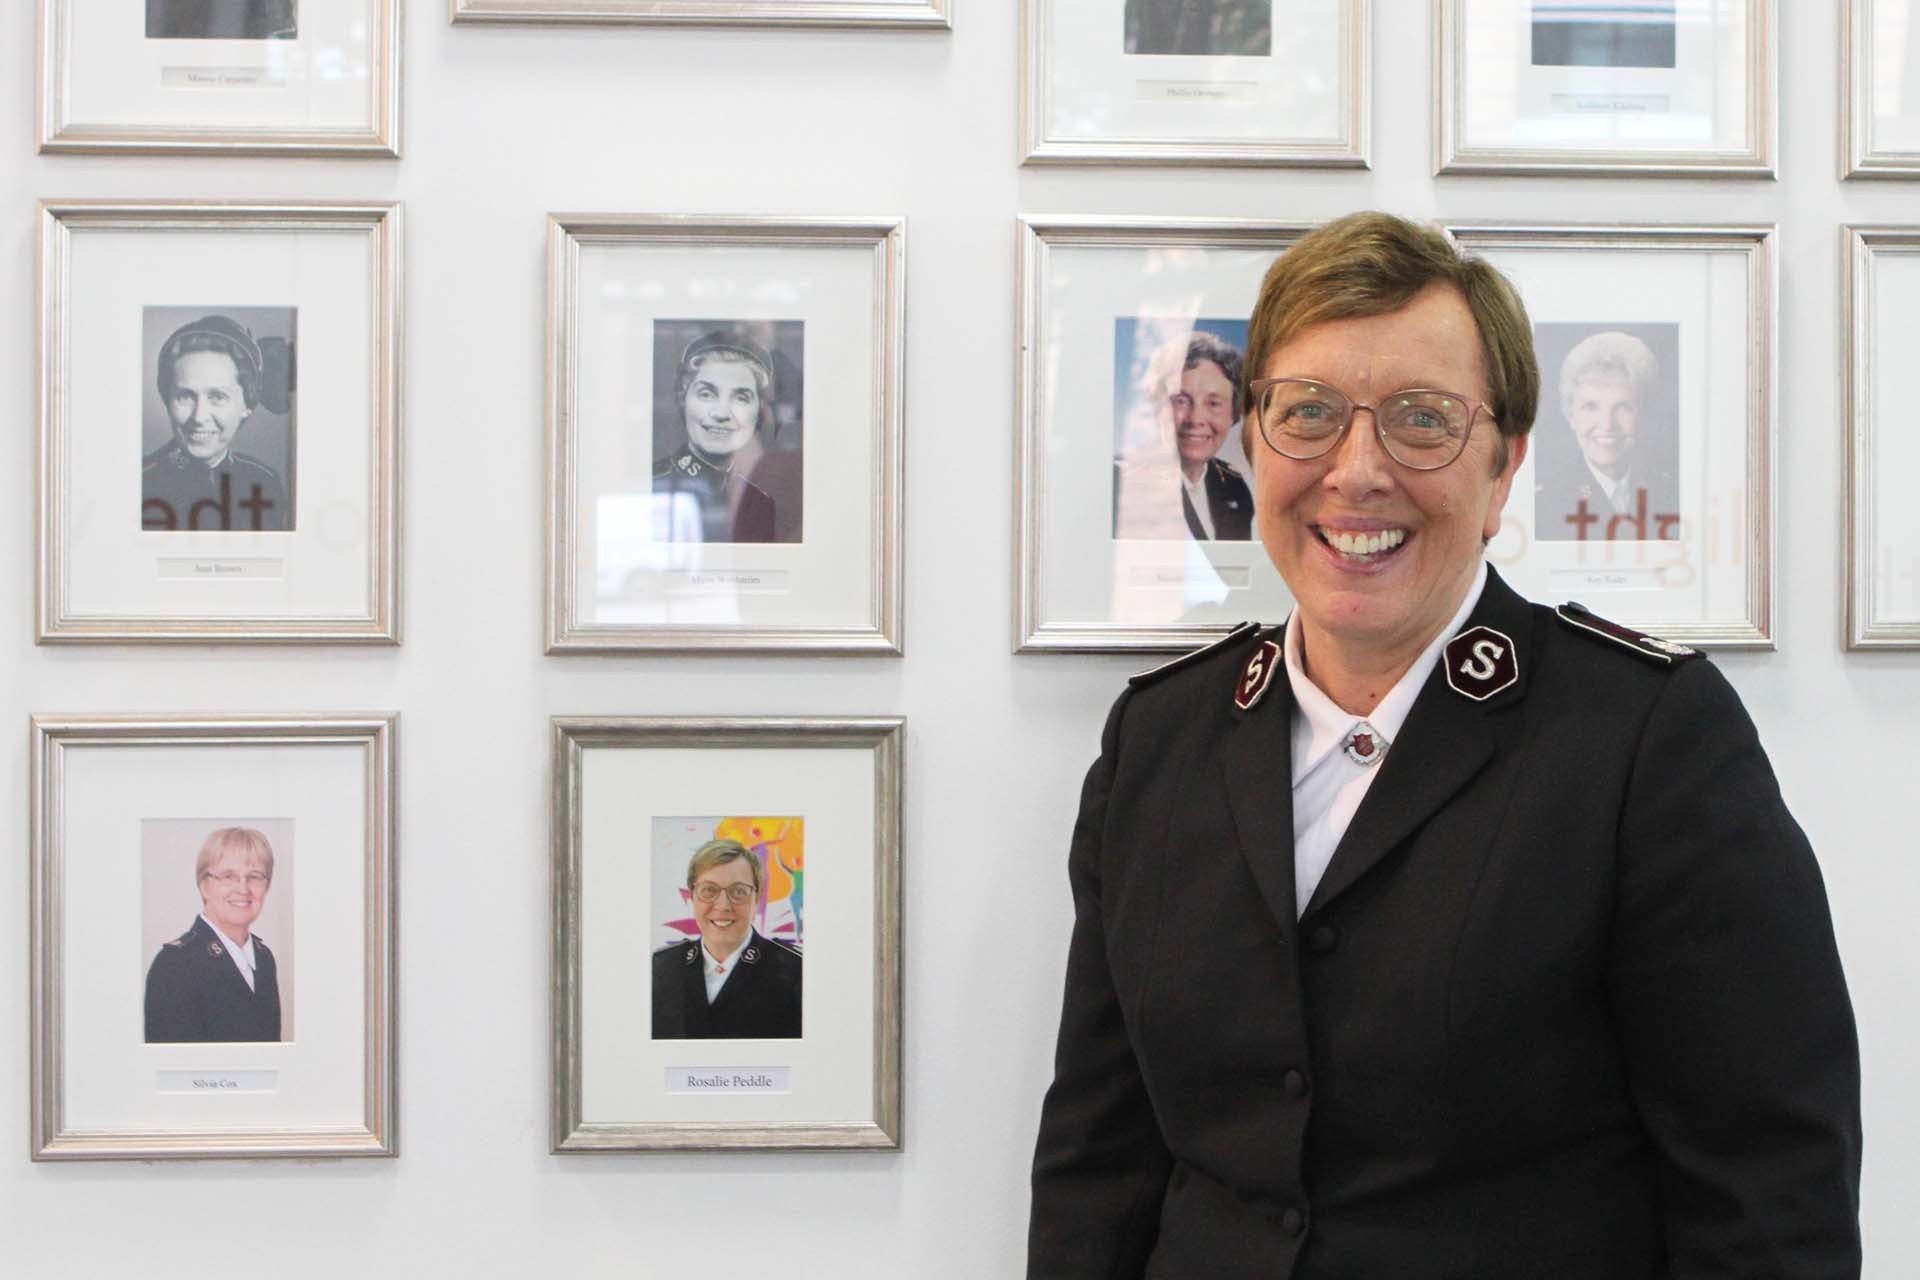 Commissioner Rosalie Peddle with her portrait at Salvation Army IHQ